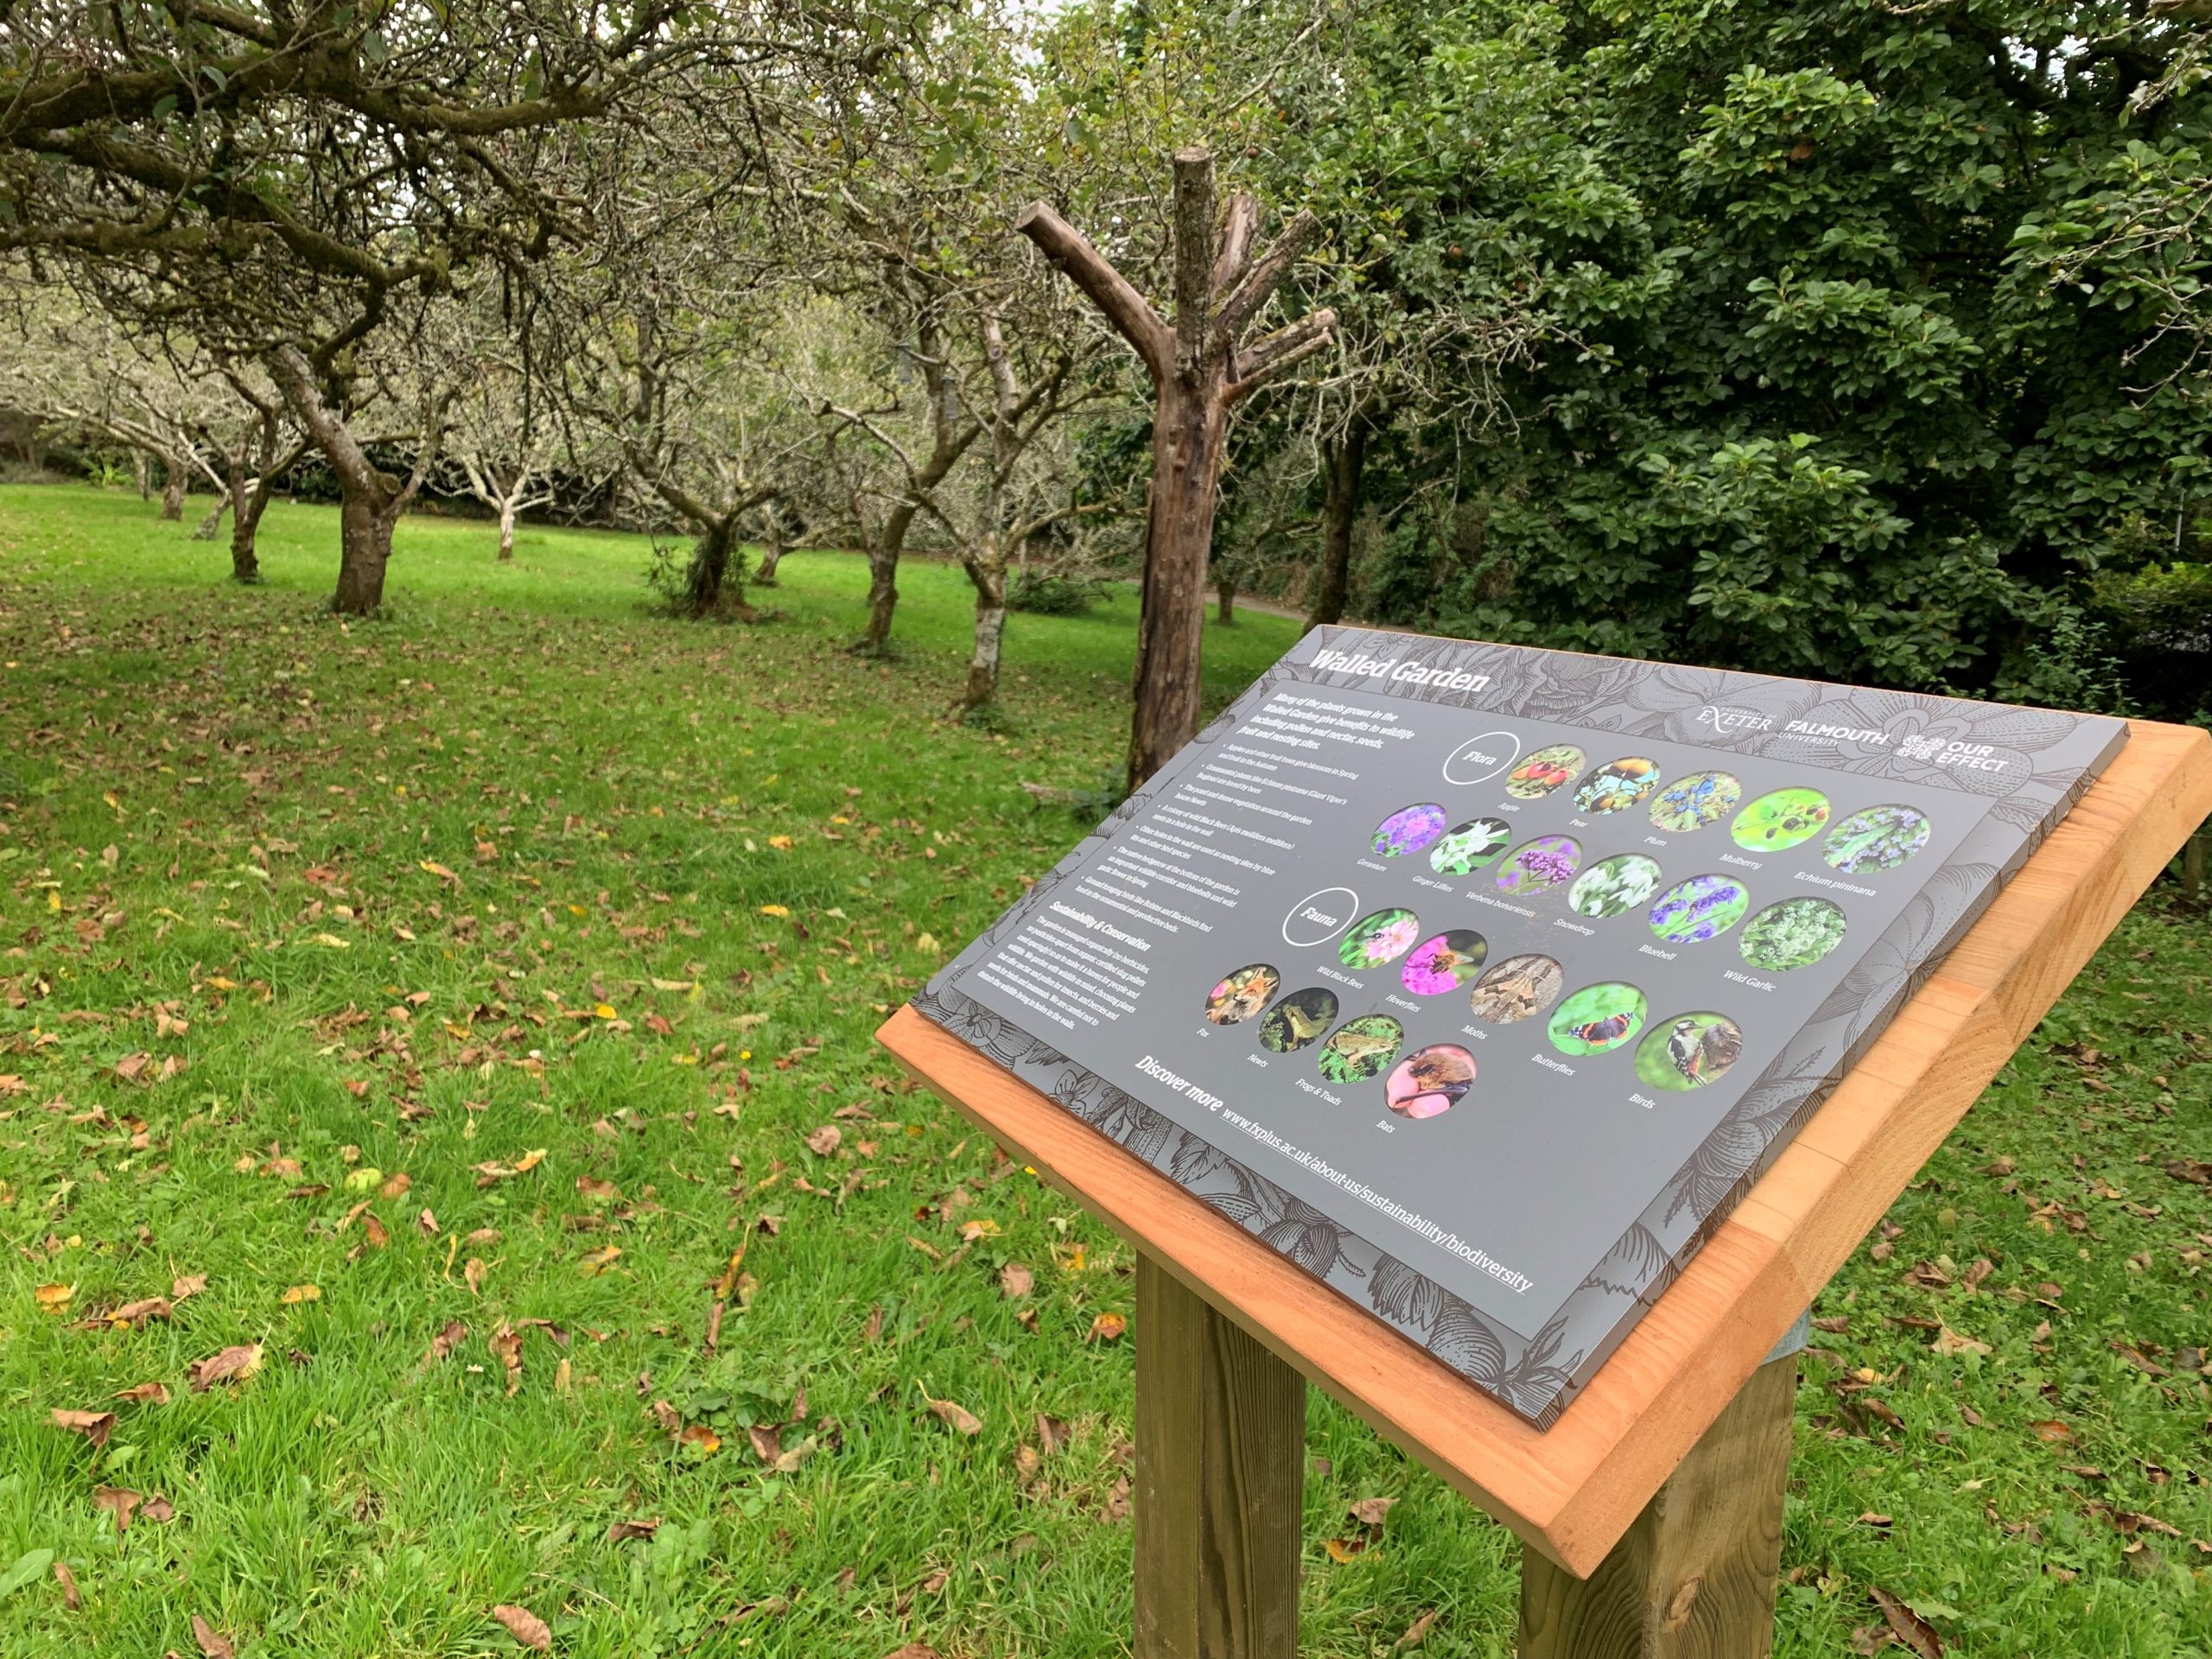 One of the biodiversity information signs at Penryn Campus